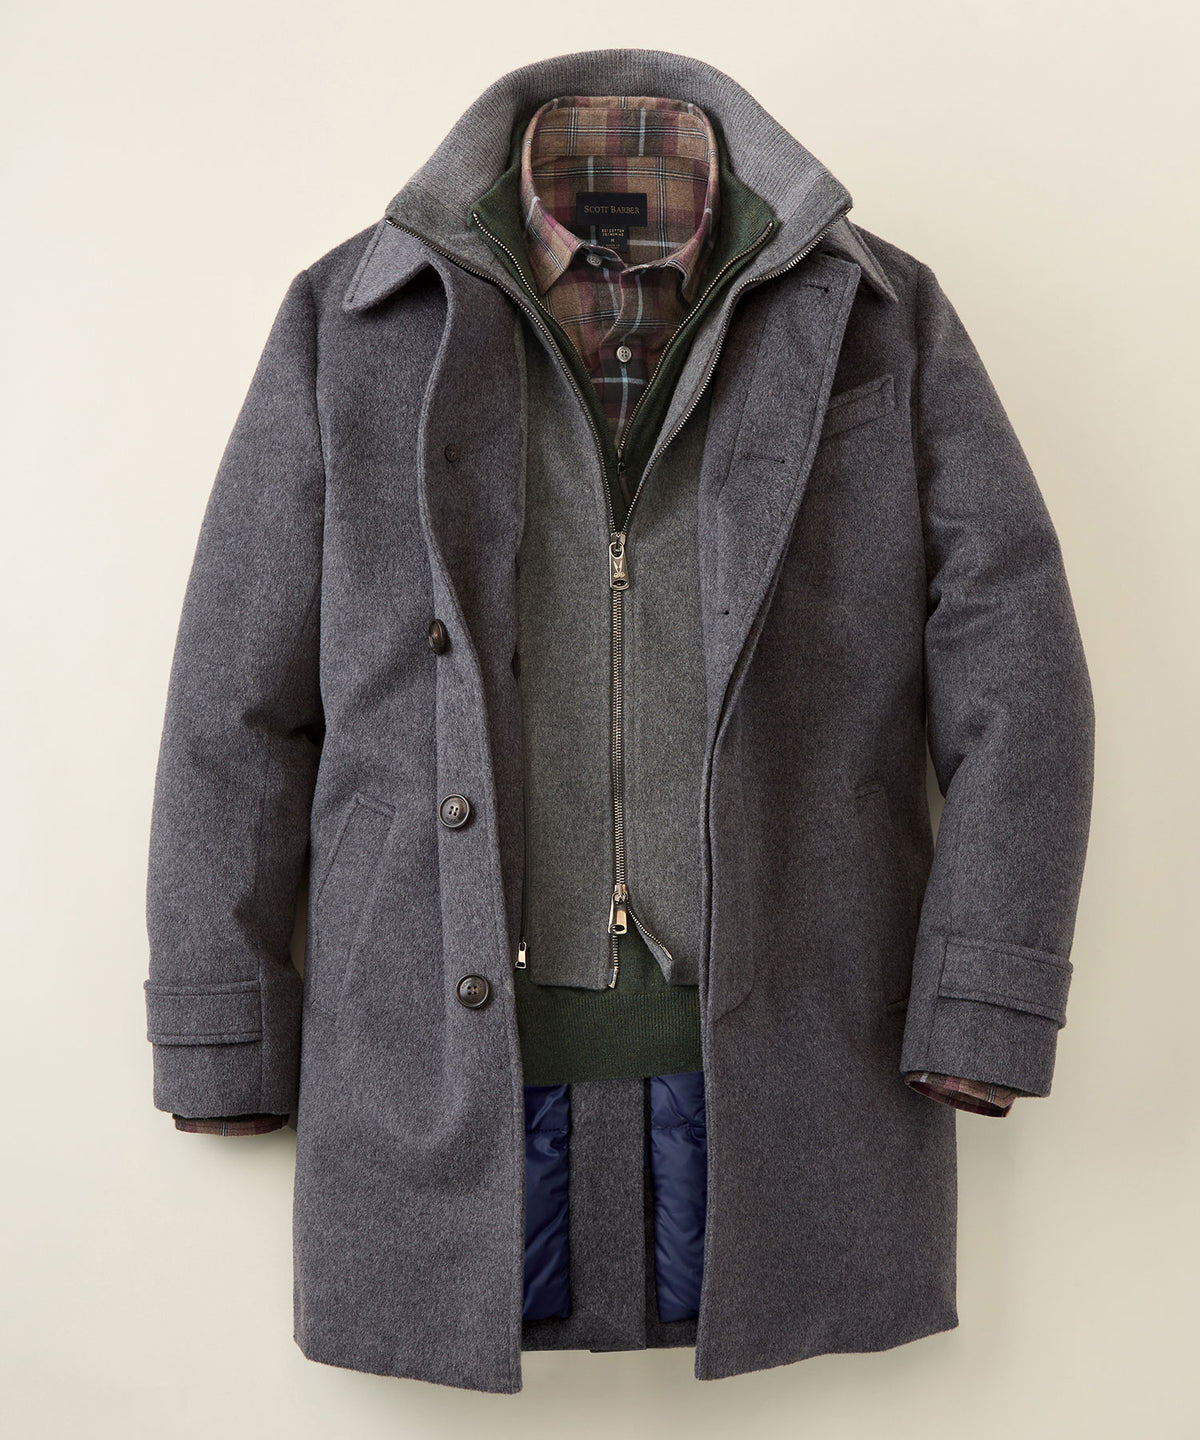 100% Cashmere Eurocoat with Removable Bib